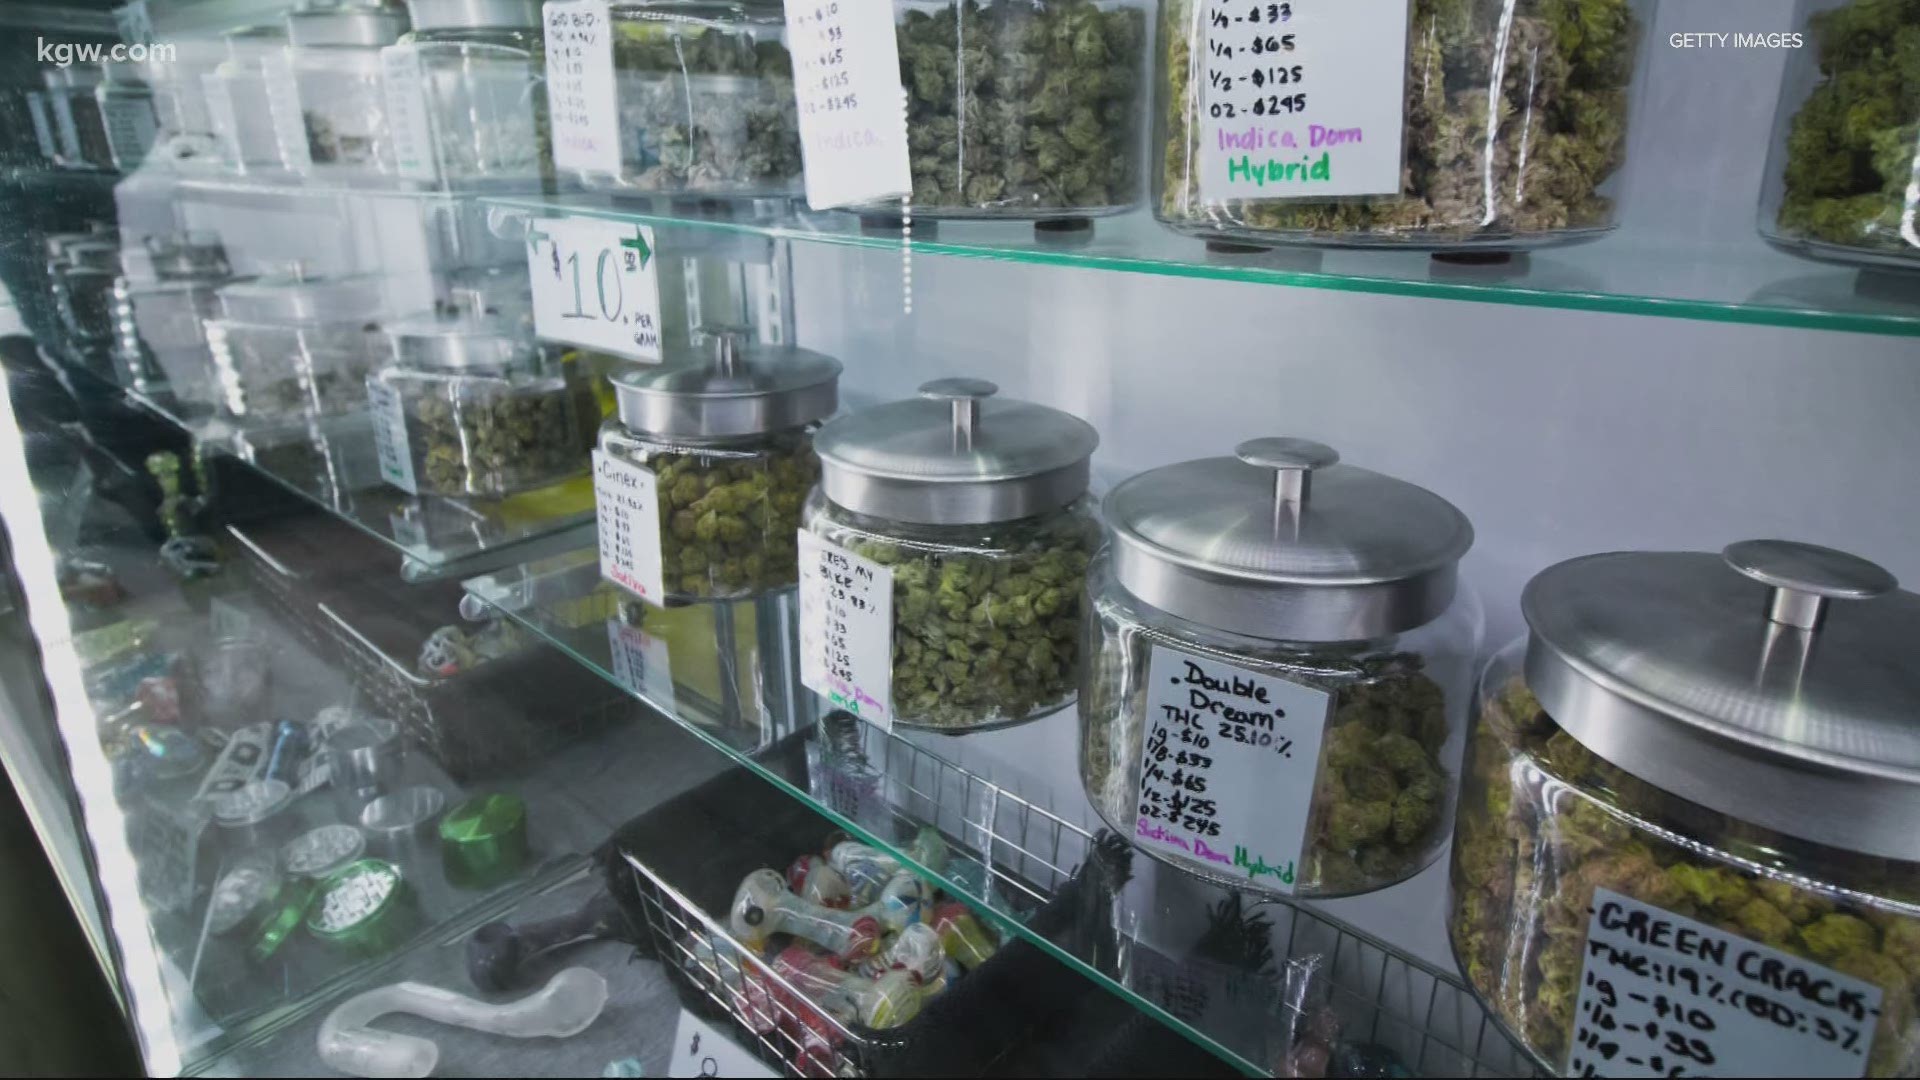 State numbers show total cannabis sales in Oregon increased from nearly 800 million dollars in 2019 to $1.1 billion in 2020.